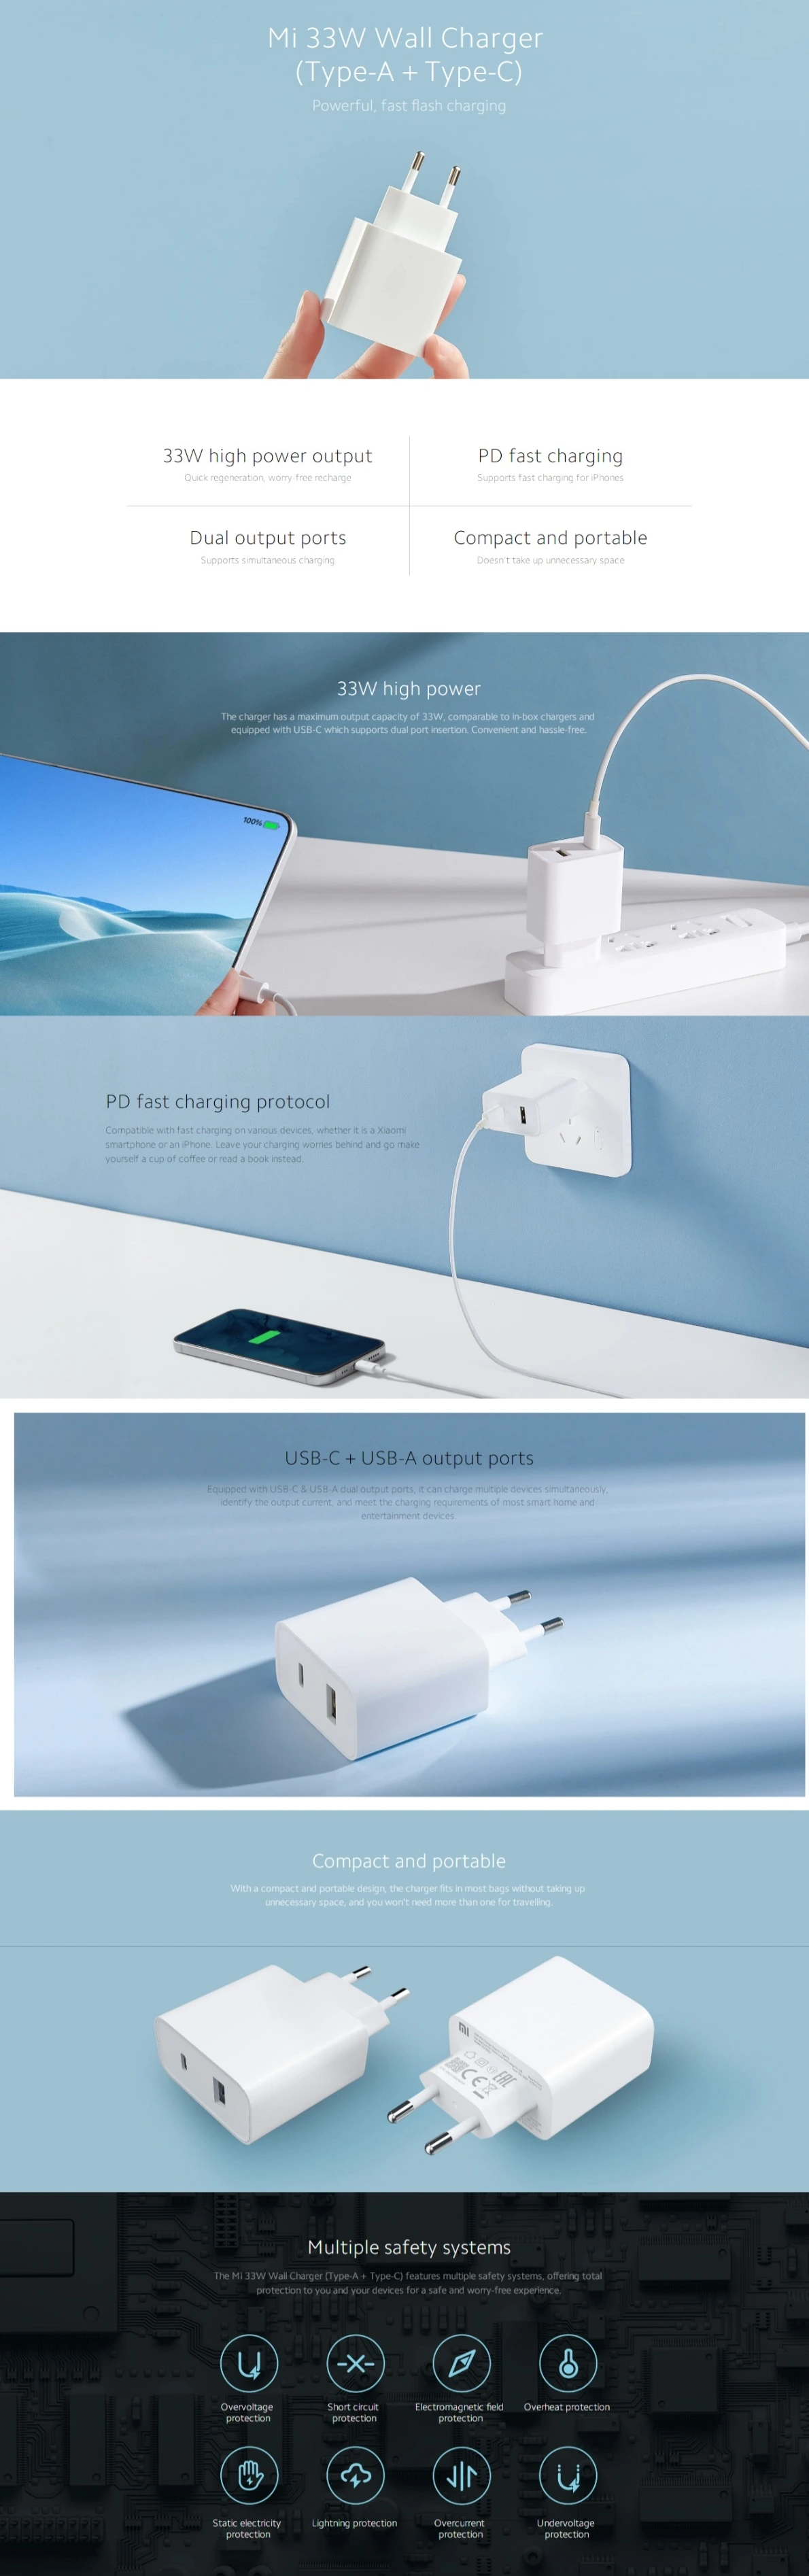 MI33W- Wall-Charger (5)